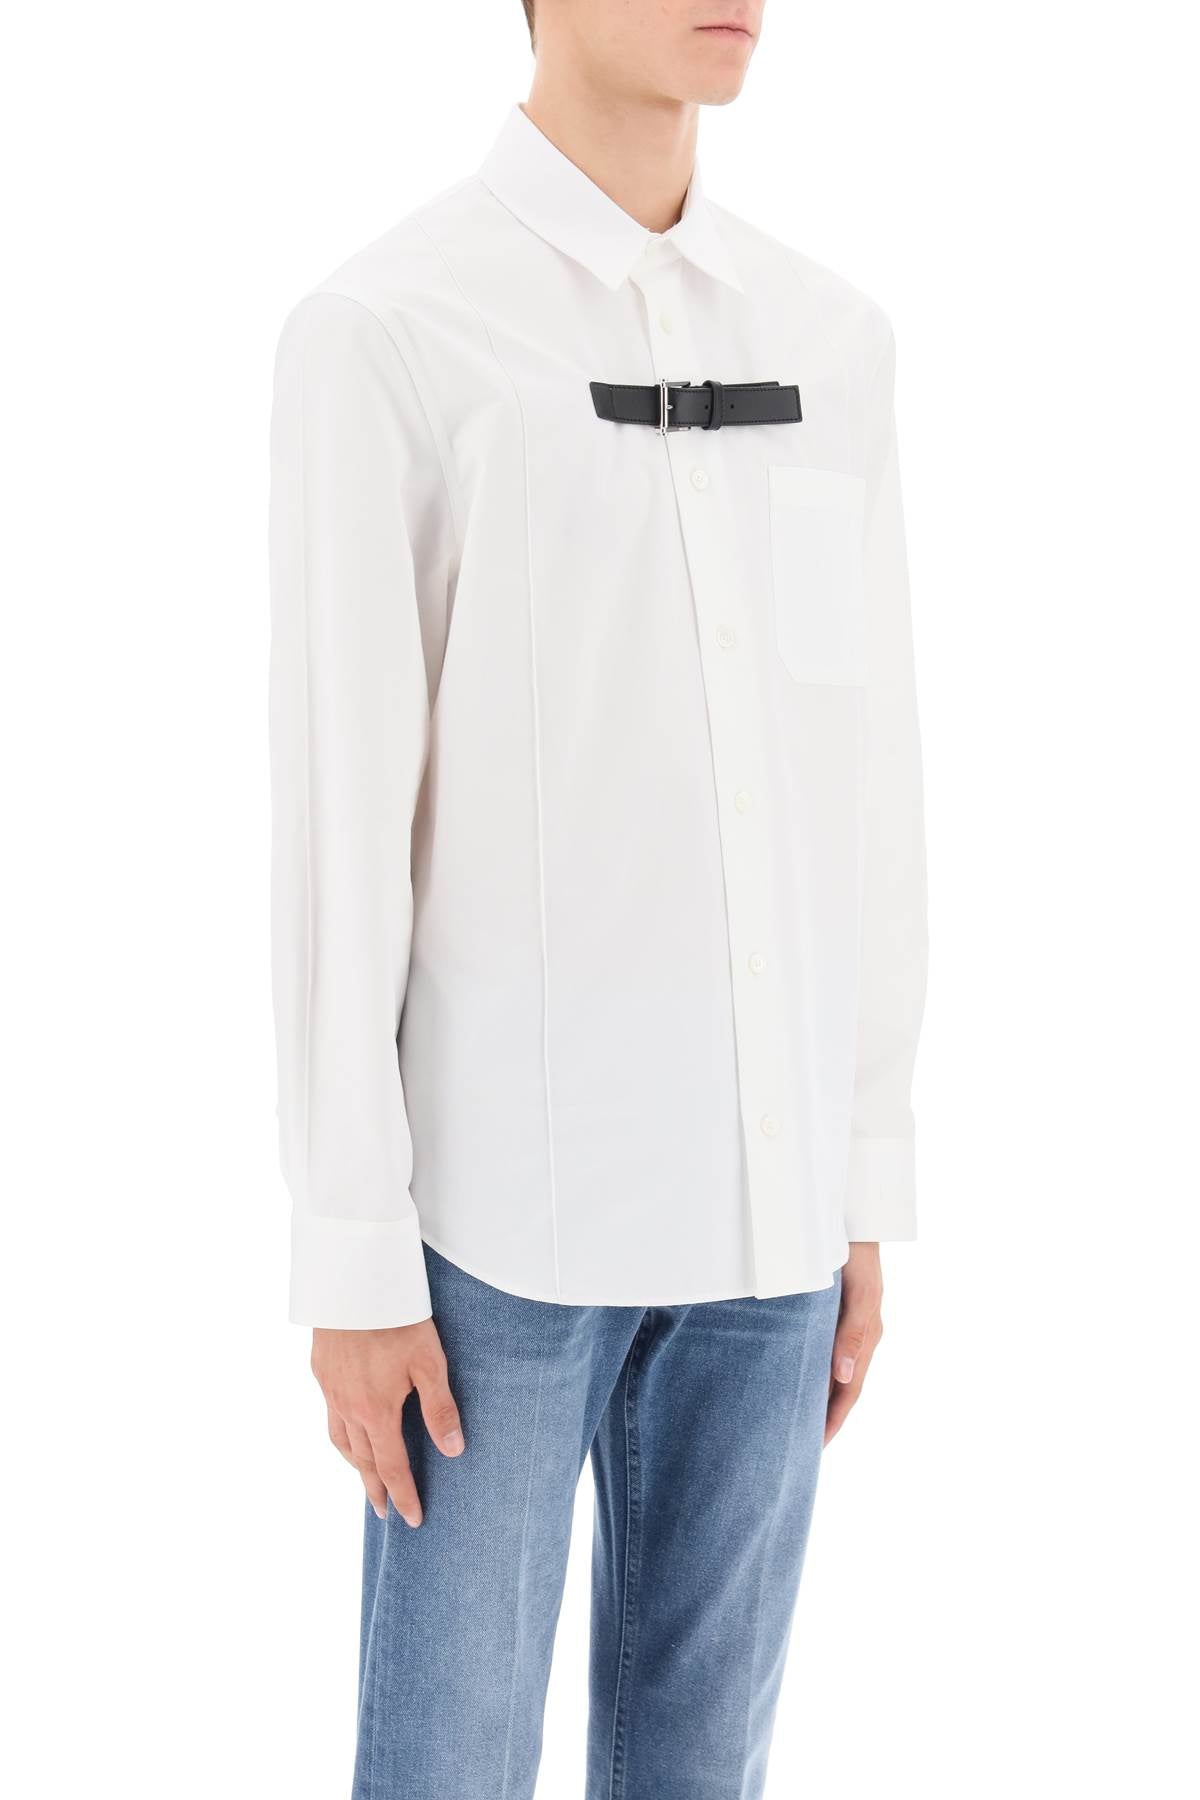 Versace leather strap shirt-1